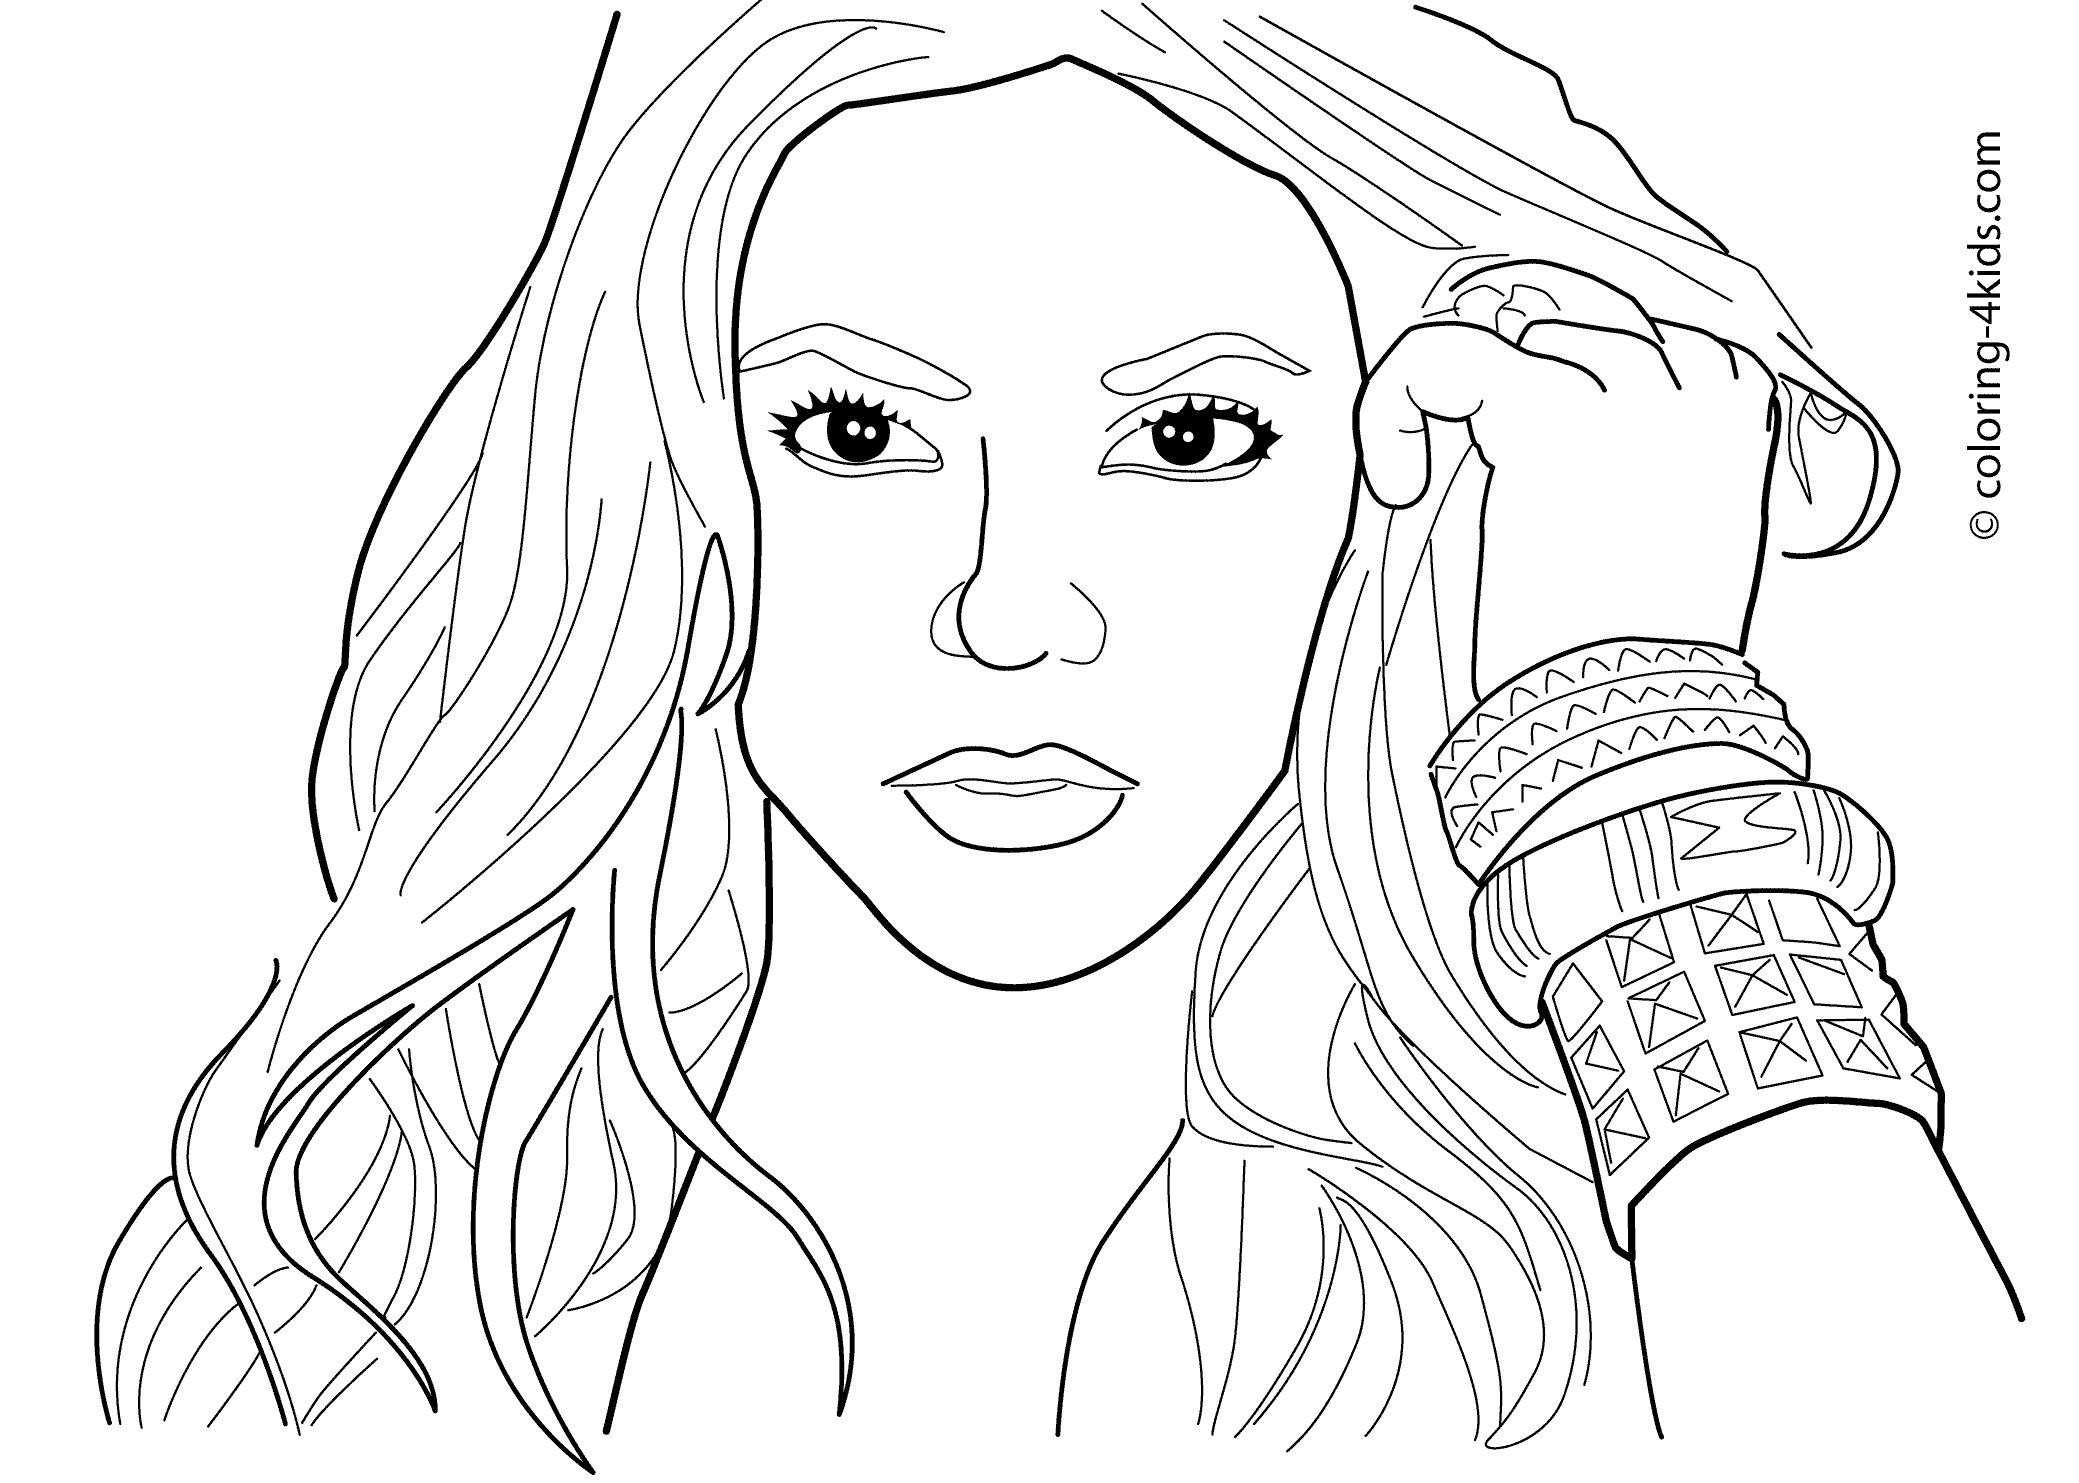 Celebrities Coloring Pages - Coloring Pages For All Ages